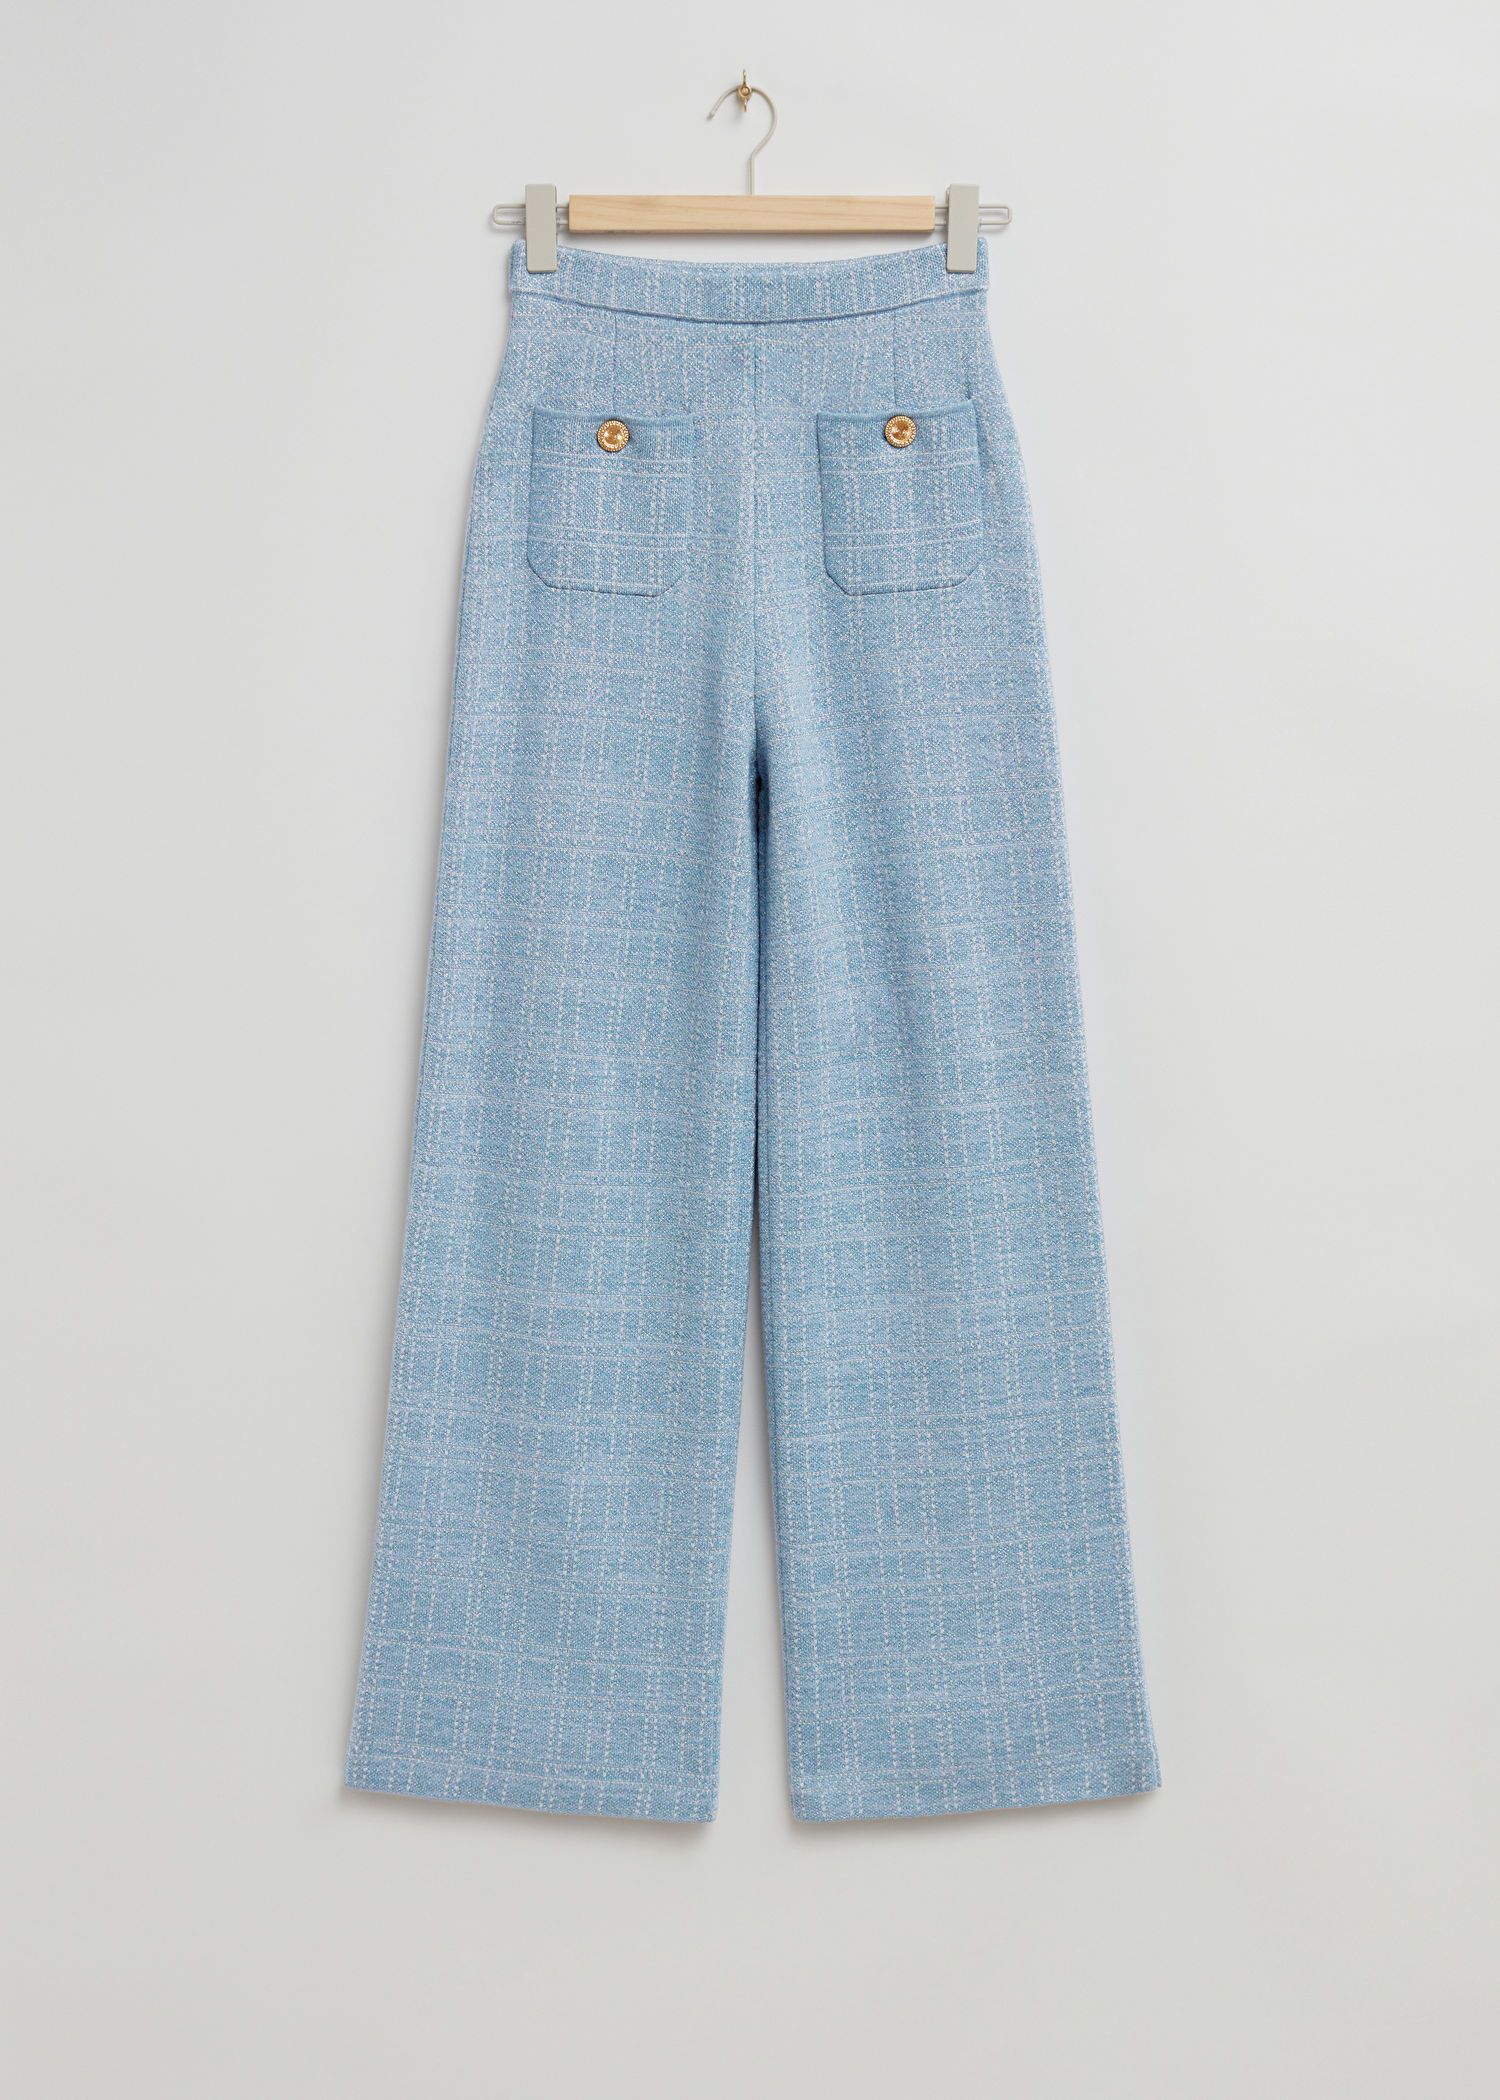 Tweed Knit Patch Pocket Trousers | & Other Stories US